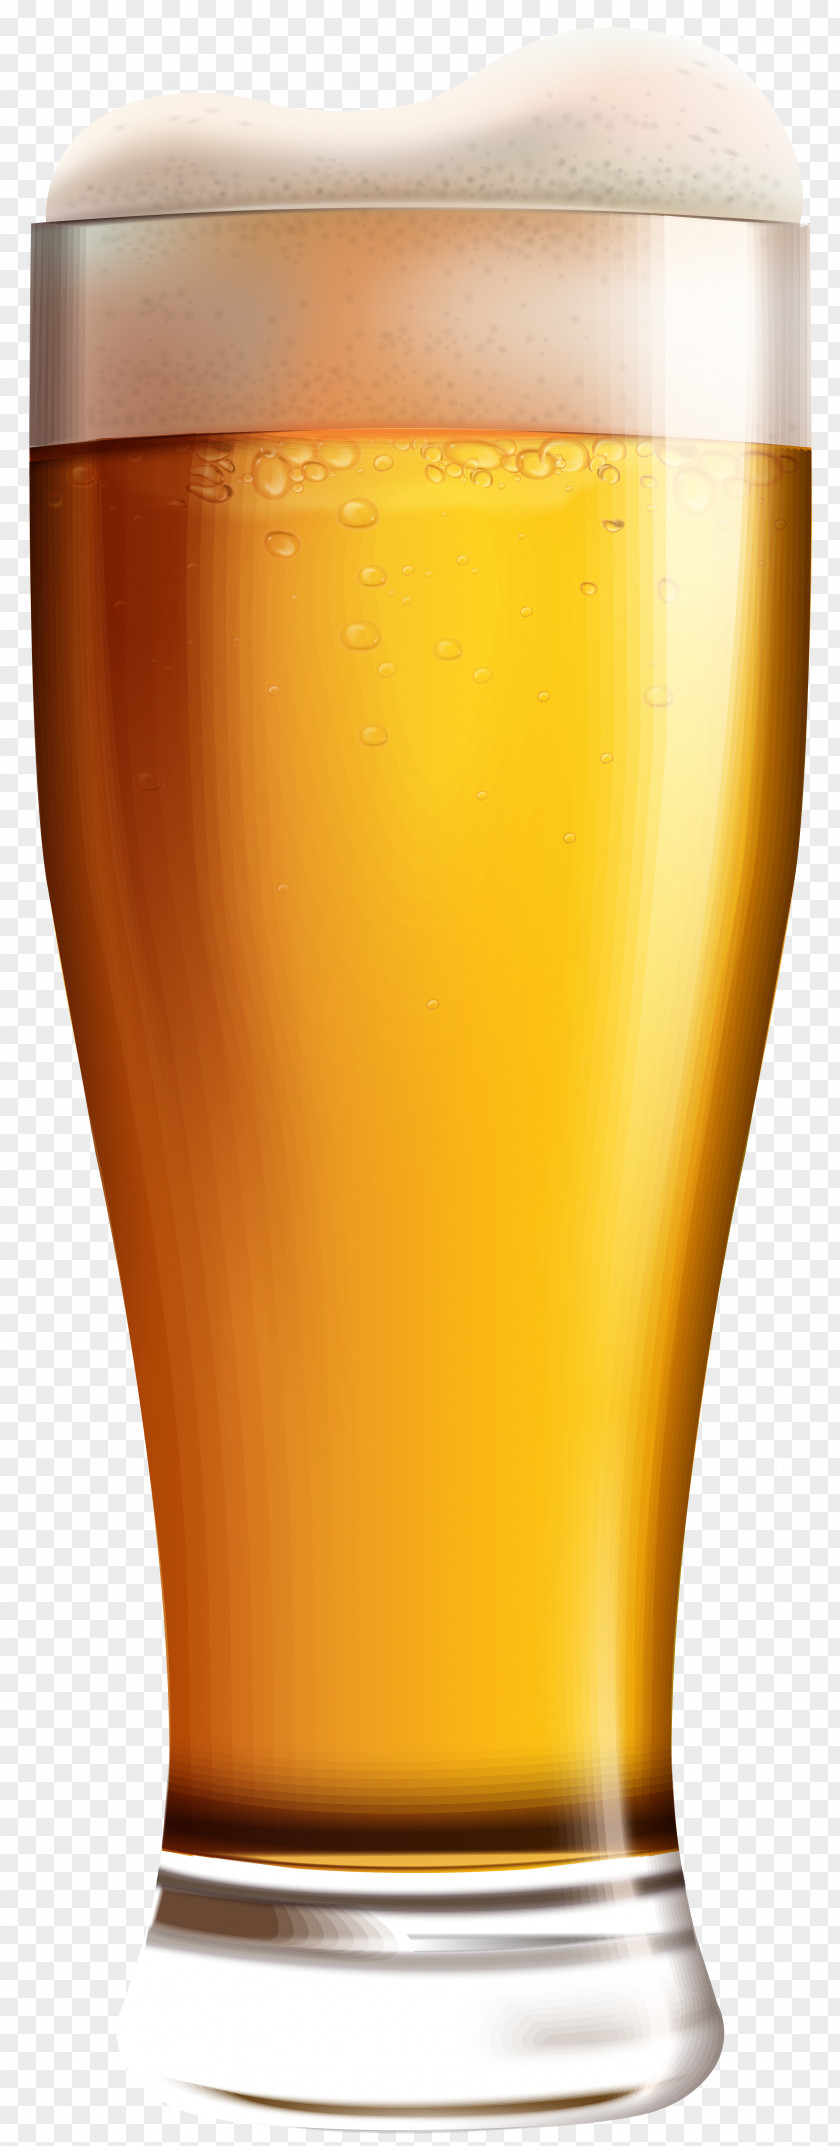 Glass With Beer Clip Art Image Wheat Pong PNG